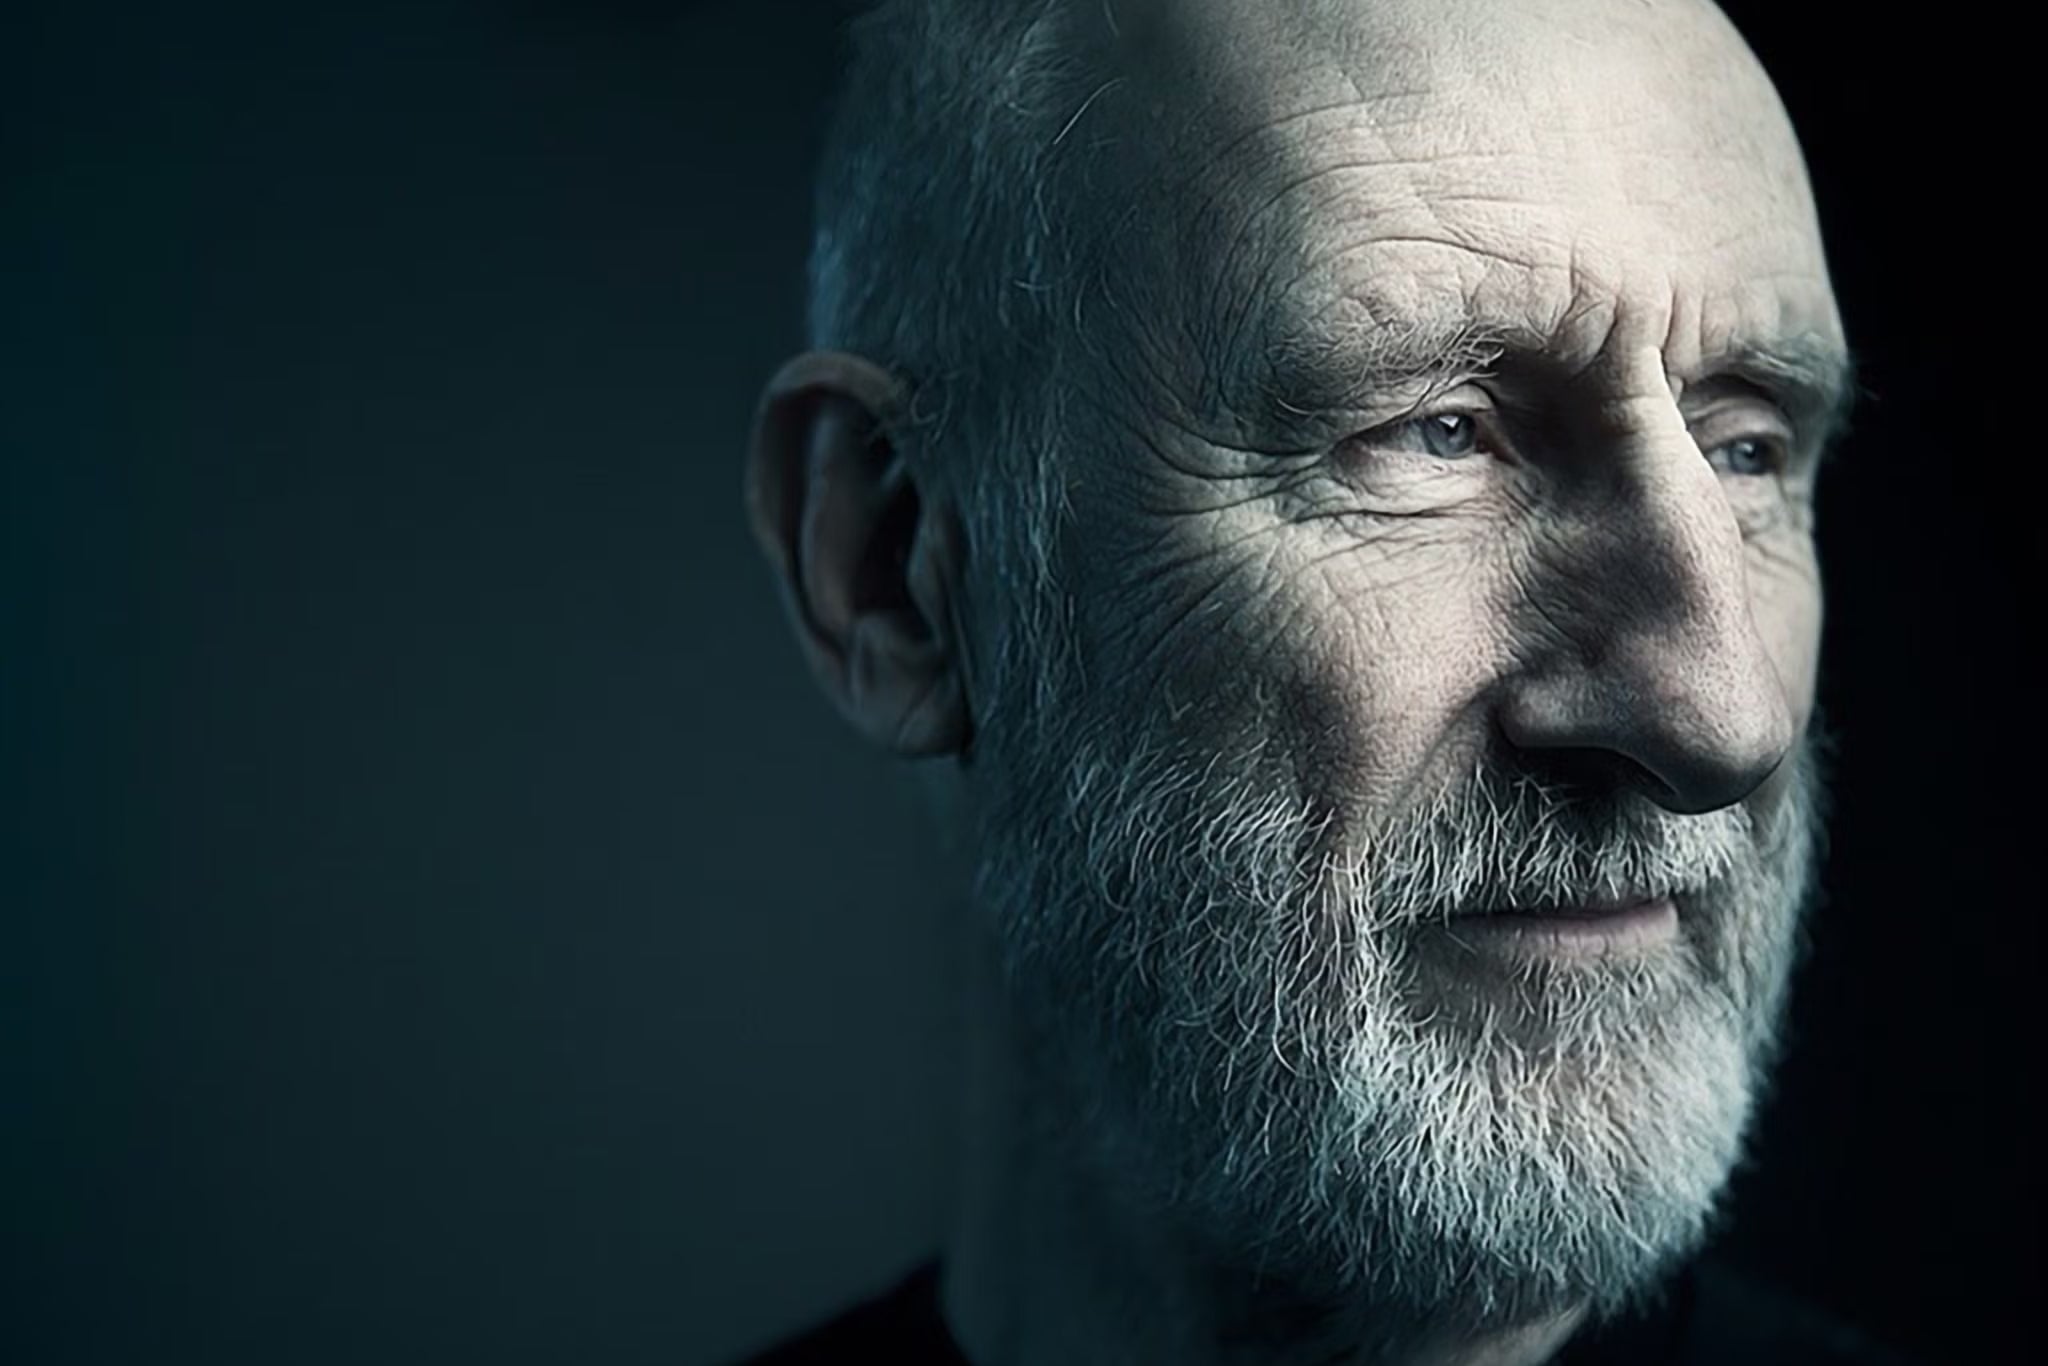 <p>James Cromwell: ‘We must speak truth to power – that’s where change comes from’ </p>